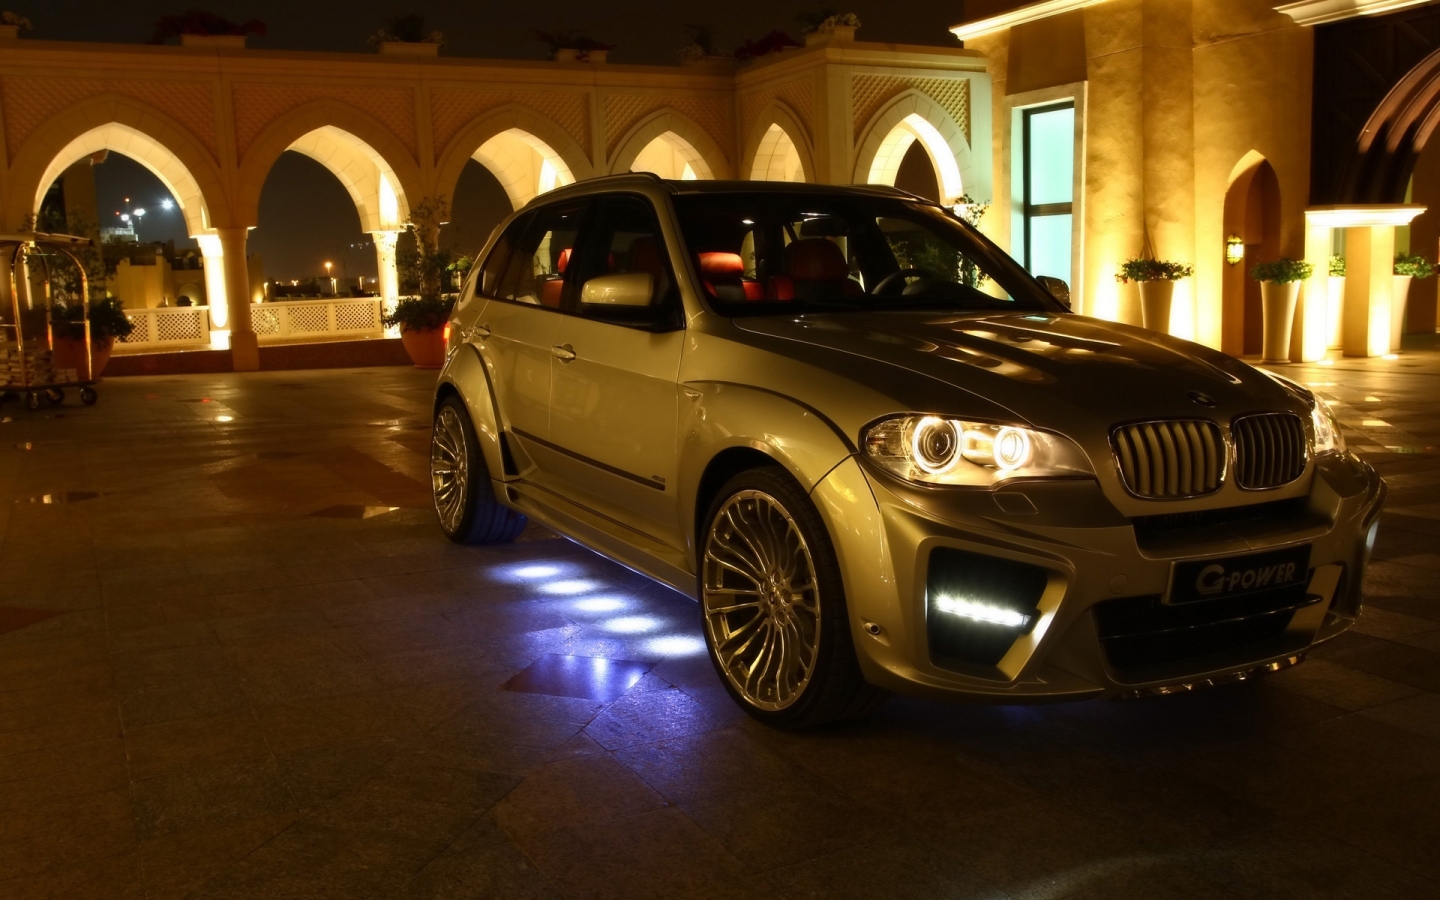 BMW X5 Typhoon 2009 G Power for 1440 x 900 widescreen resolution